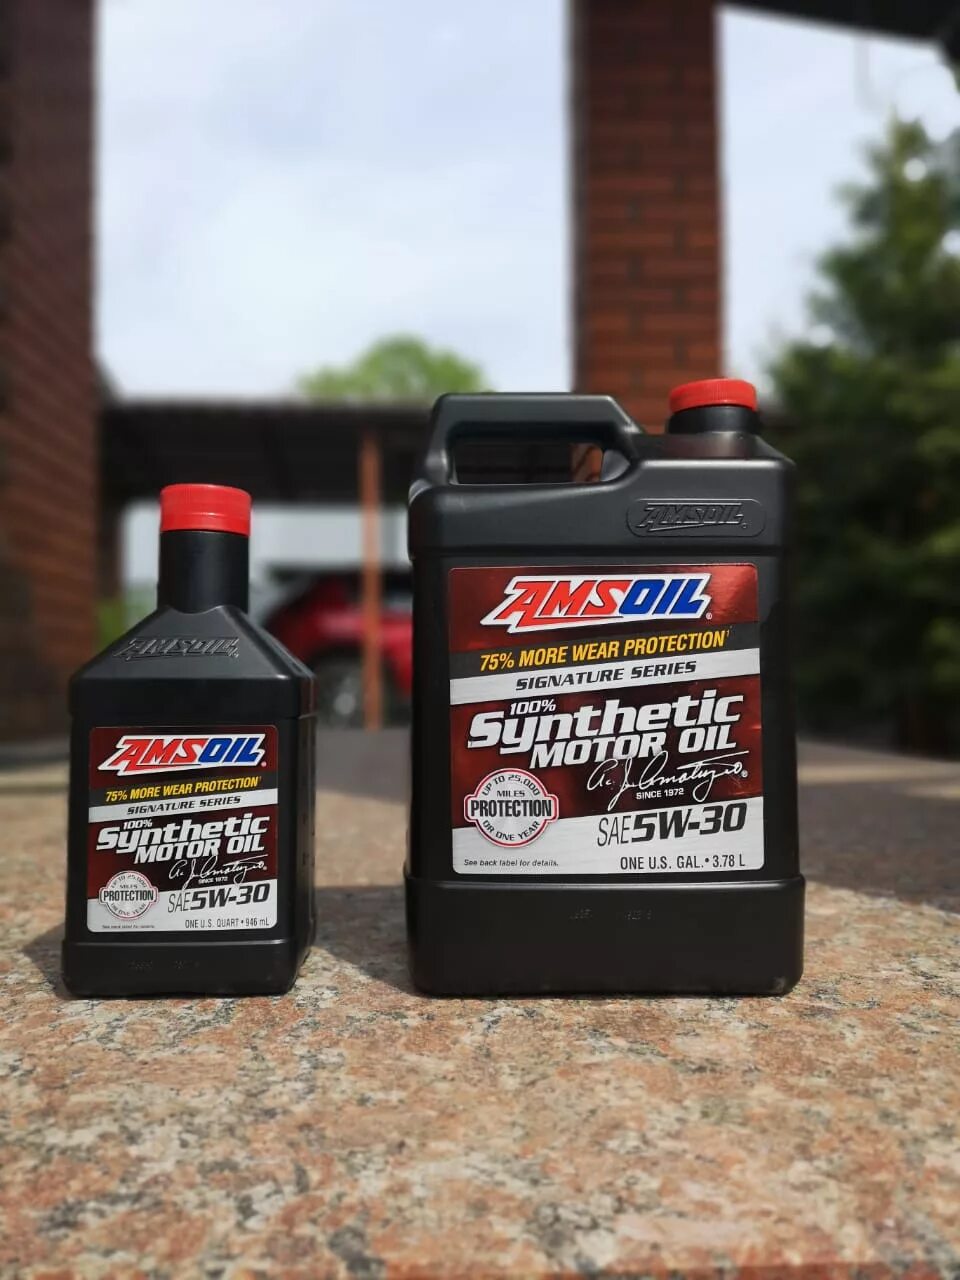 Amsoil signature series synthetic. AMSOIL 5w30 Signature. AMSOIL Signature Series 5w-30. AMSOIL Signature Series Synthetic 5w-30. AMSOIL 5w30 fuel Synthetic.